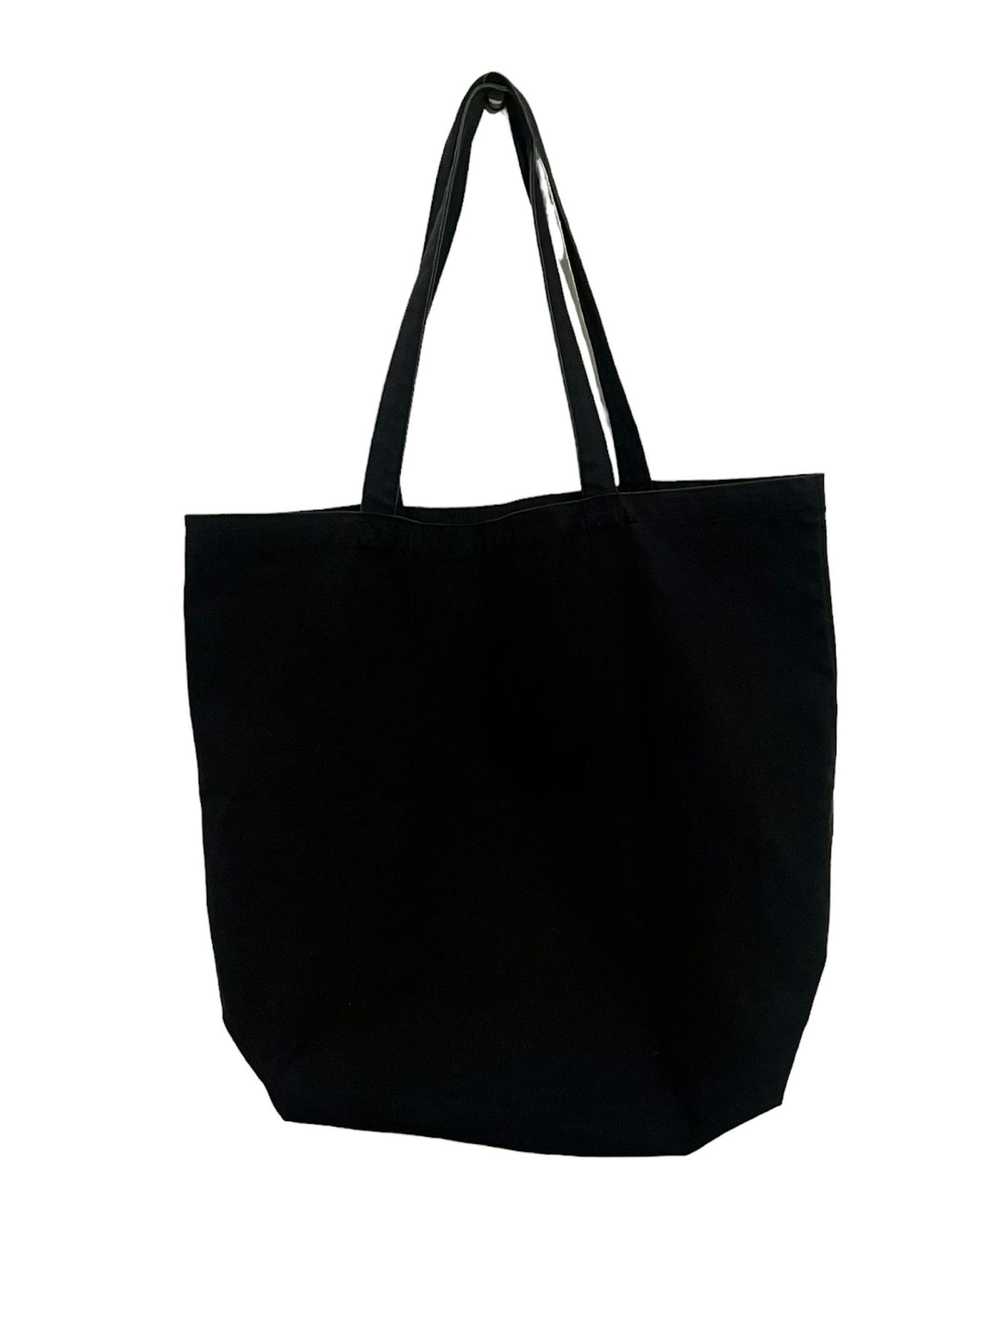 Undercover 🔥 F.U.C.K Tote Bag FOR UNLAWFUL CARNA… - image 2